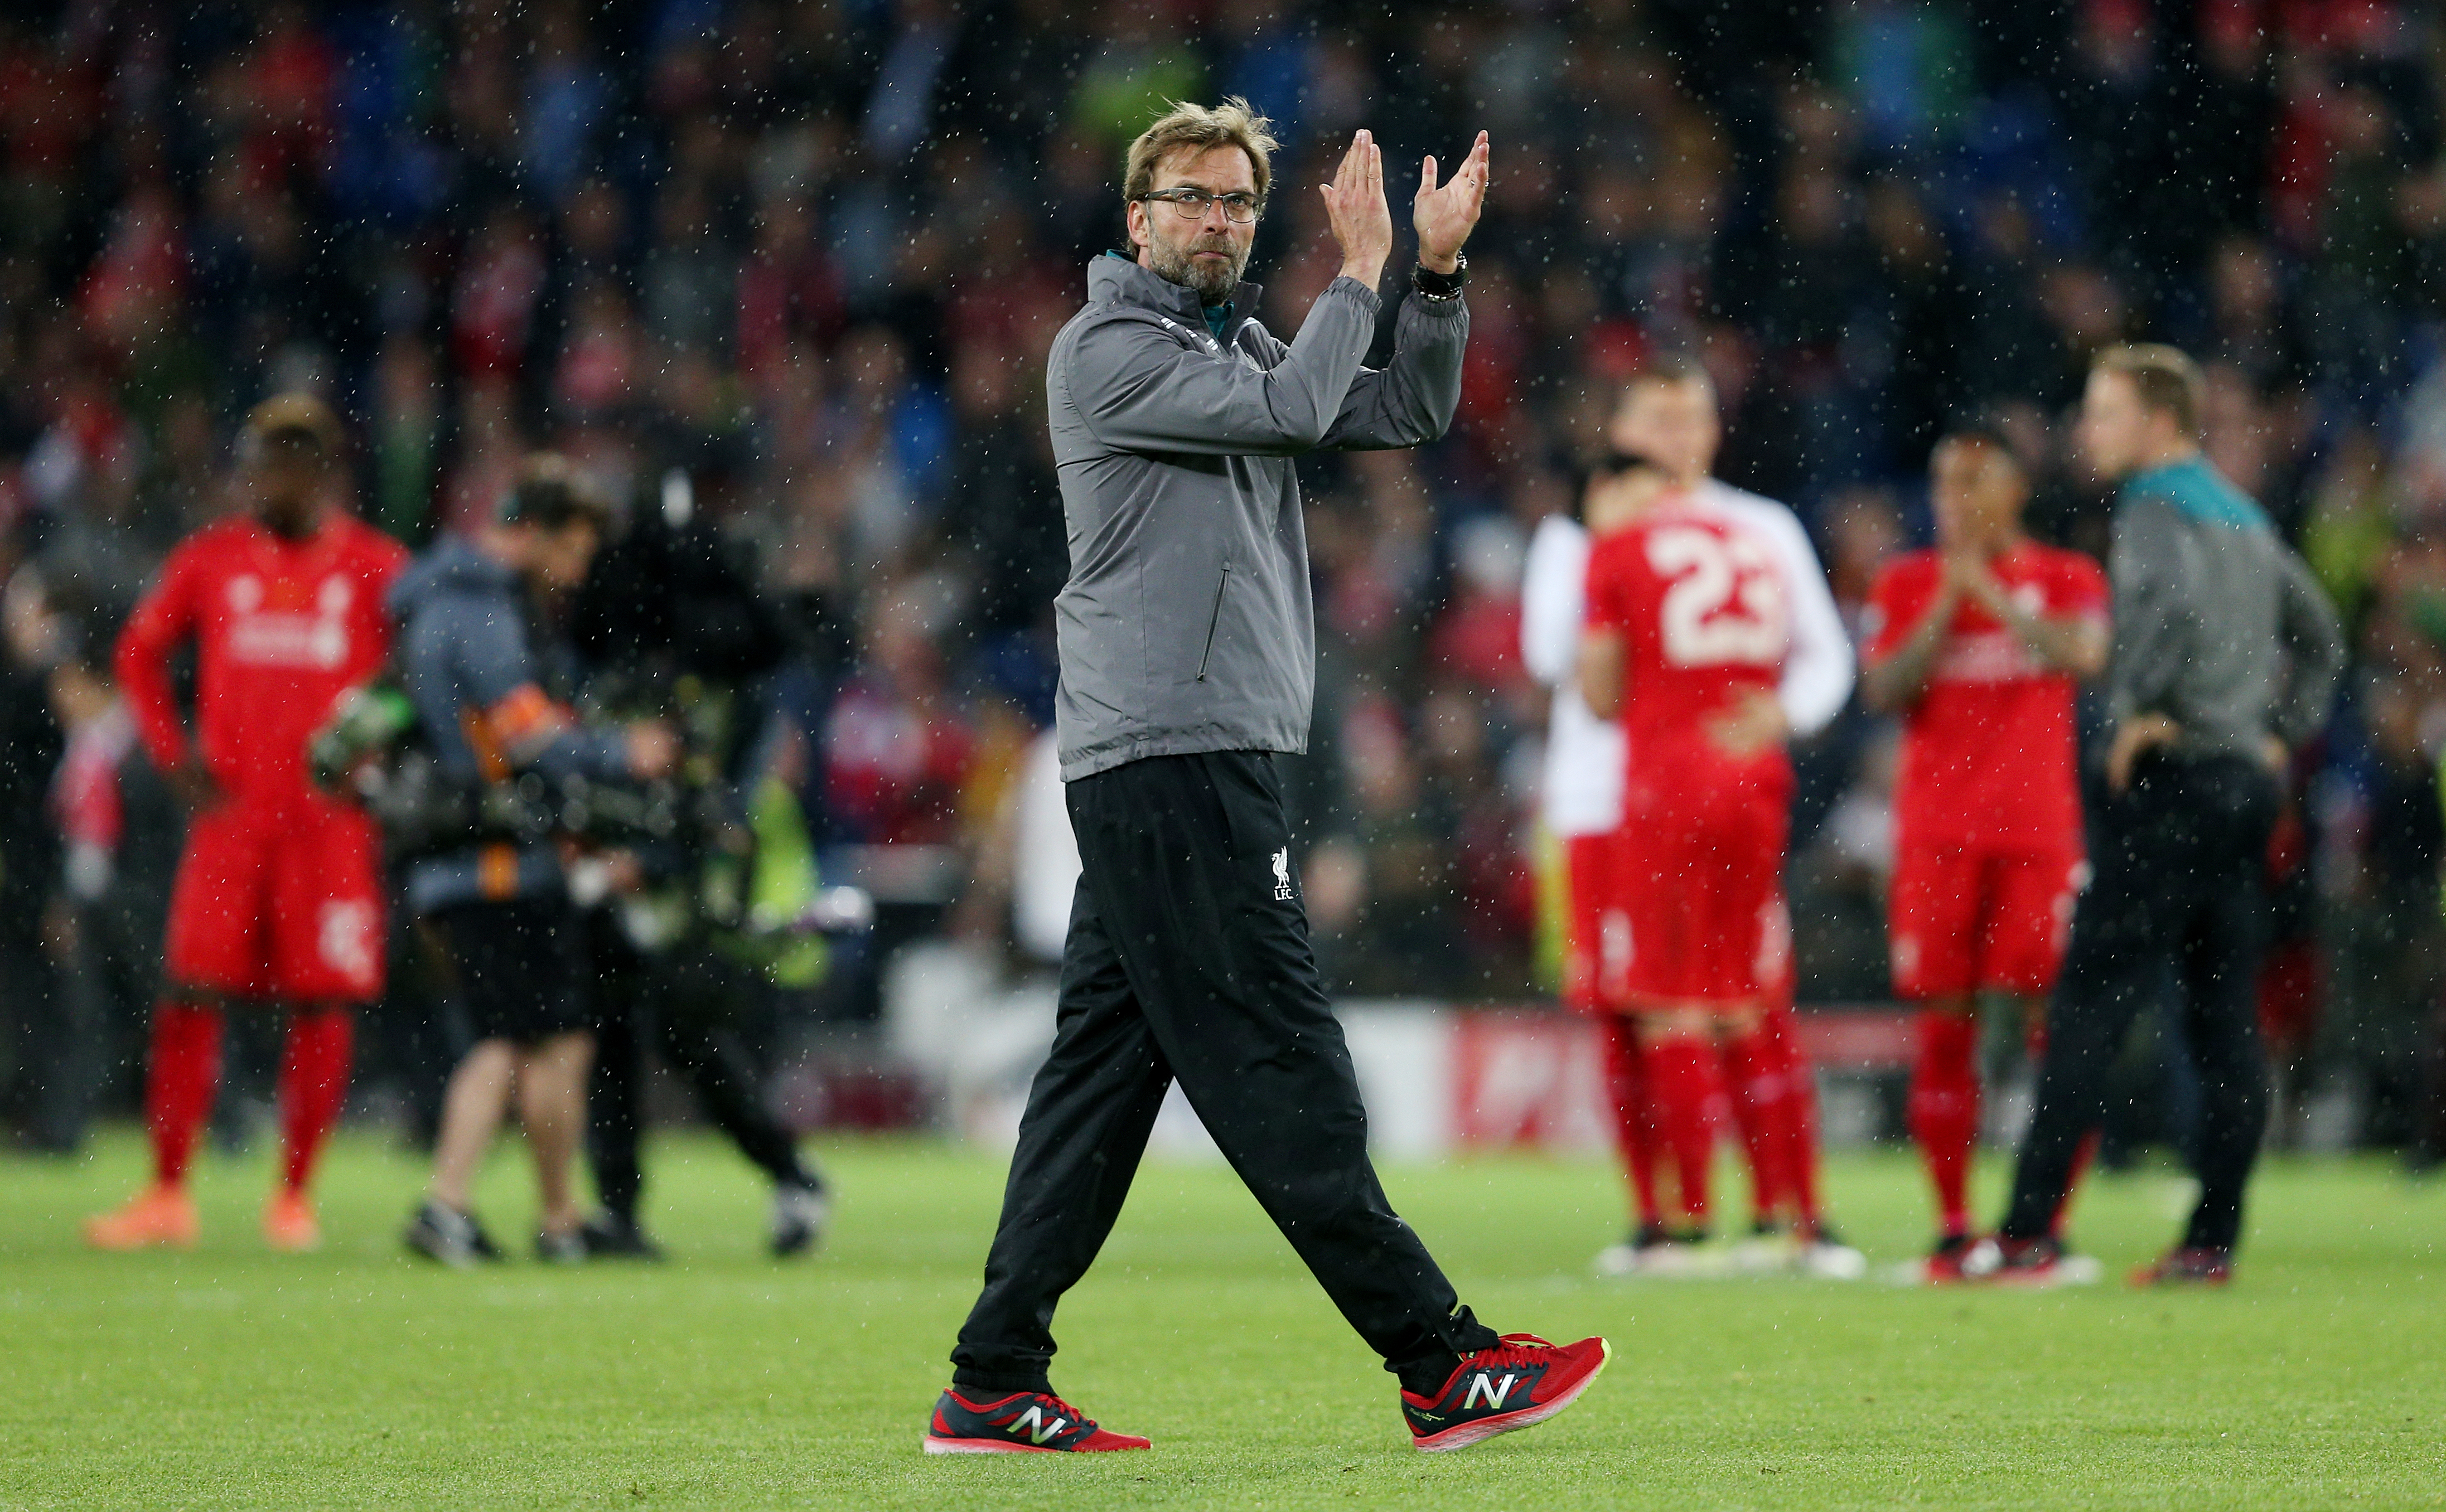 Klopp had taken charge of Liverpool the previous October